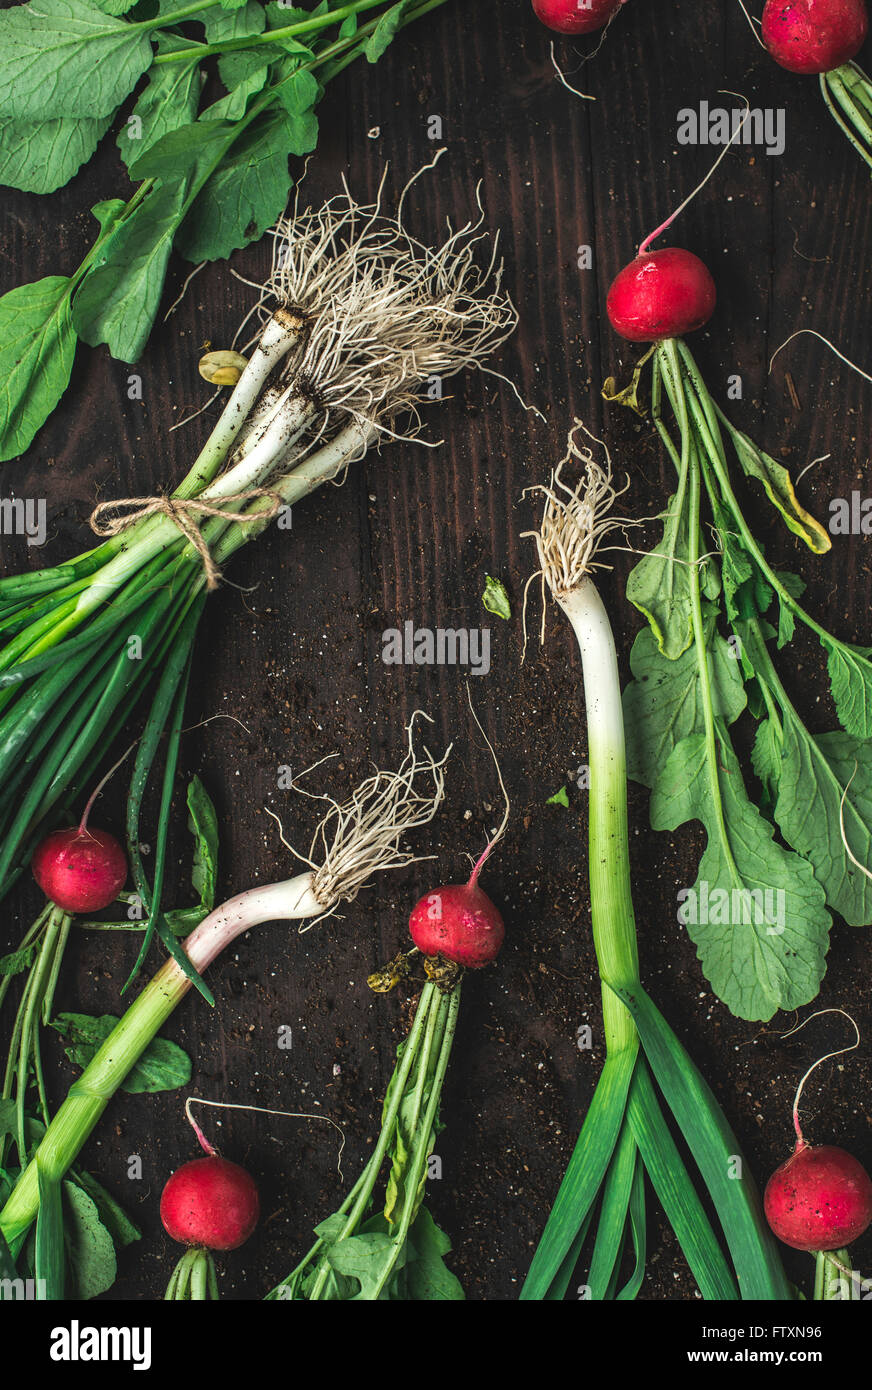 Radishes and spring onion on wooden table Stock Photo